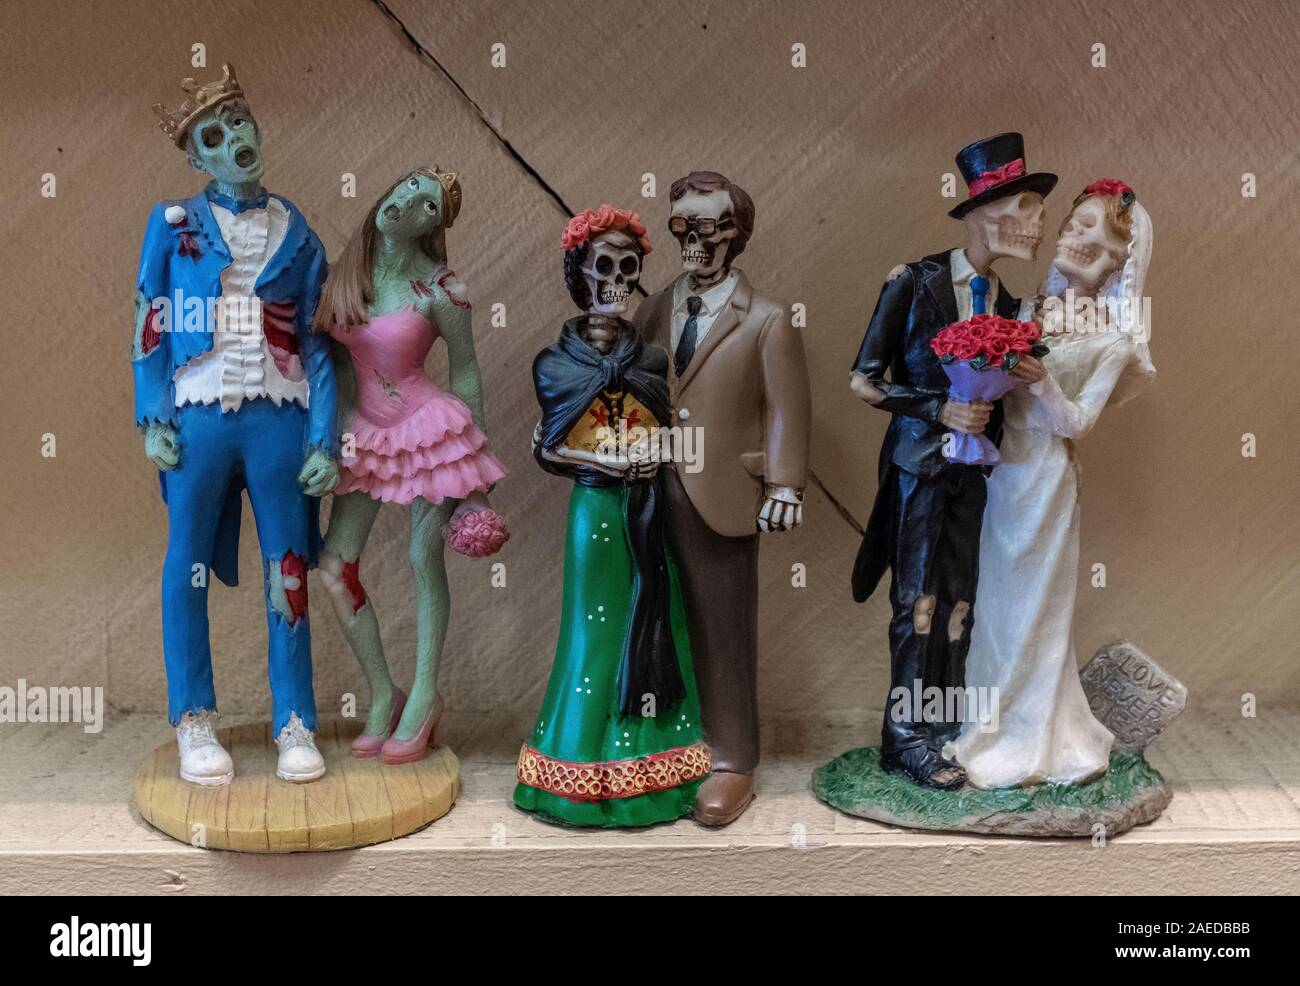 Day of the Dead and Undead Zombie Prom King and Queen figurines sold in Old Town Albuquerque, New Mexico Stock Photo